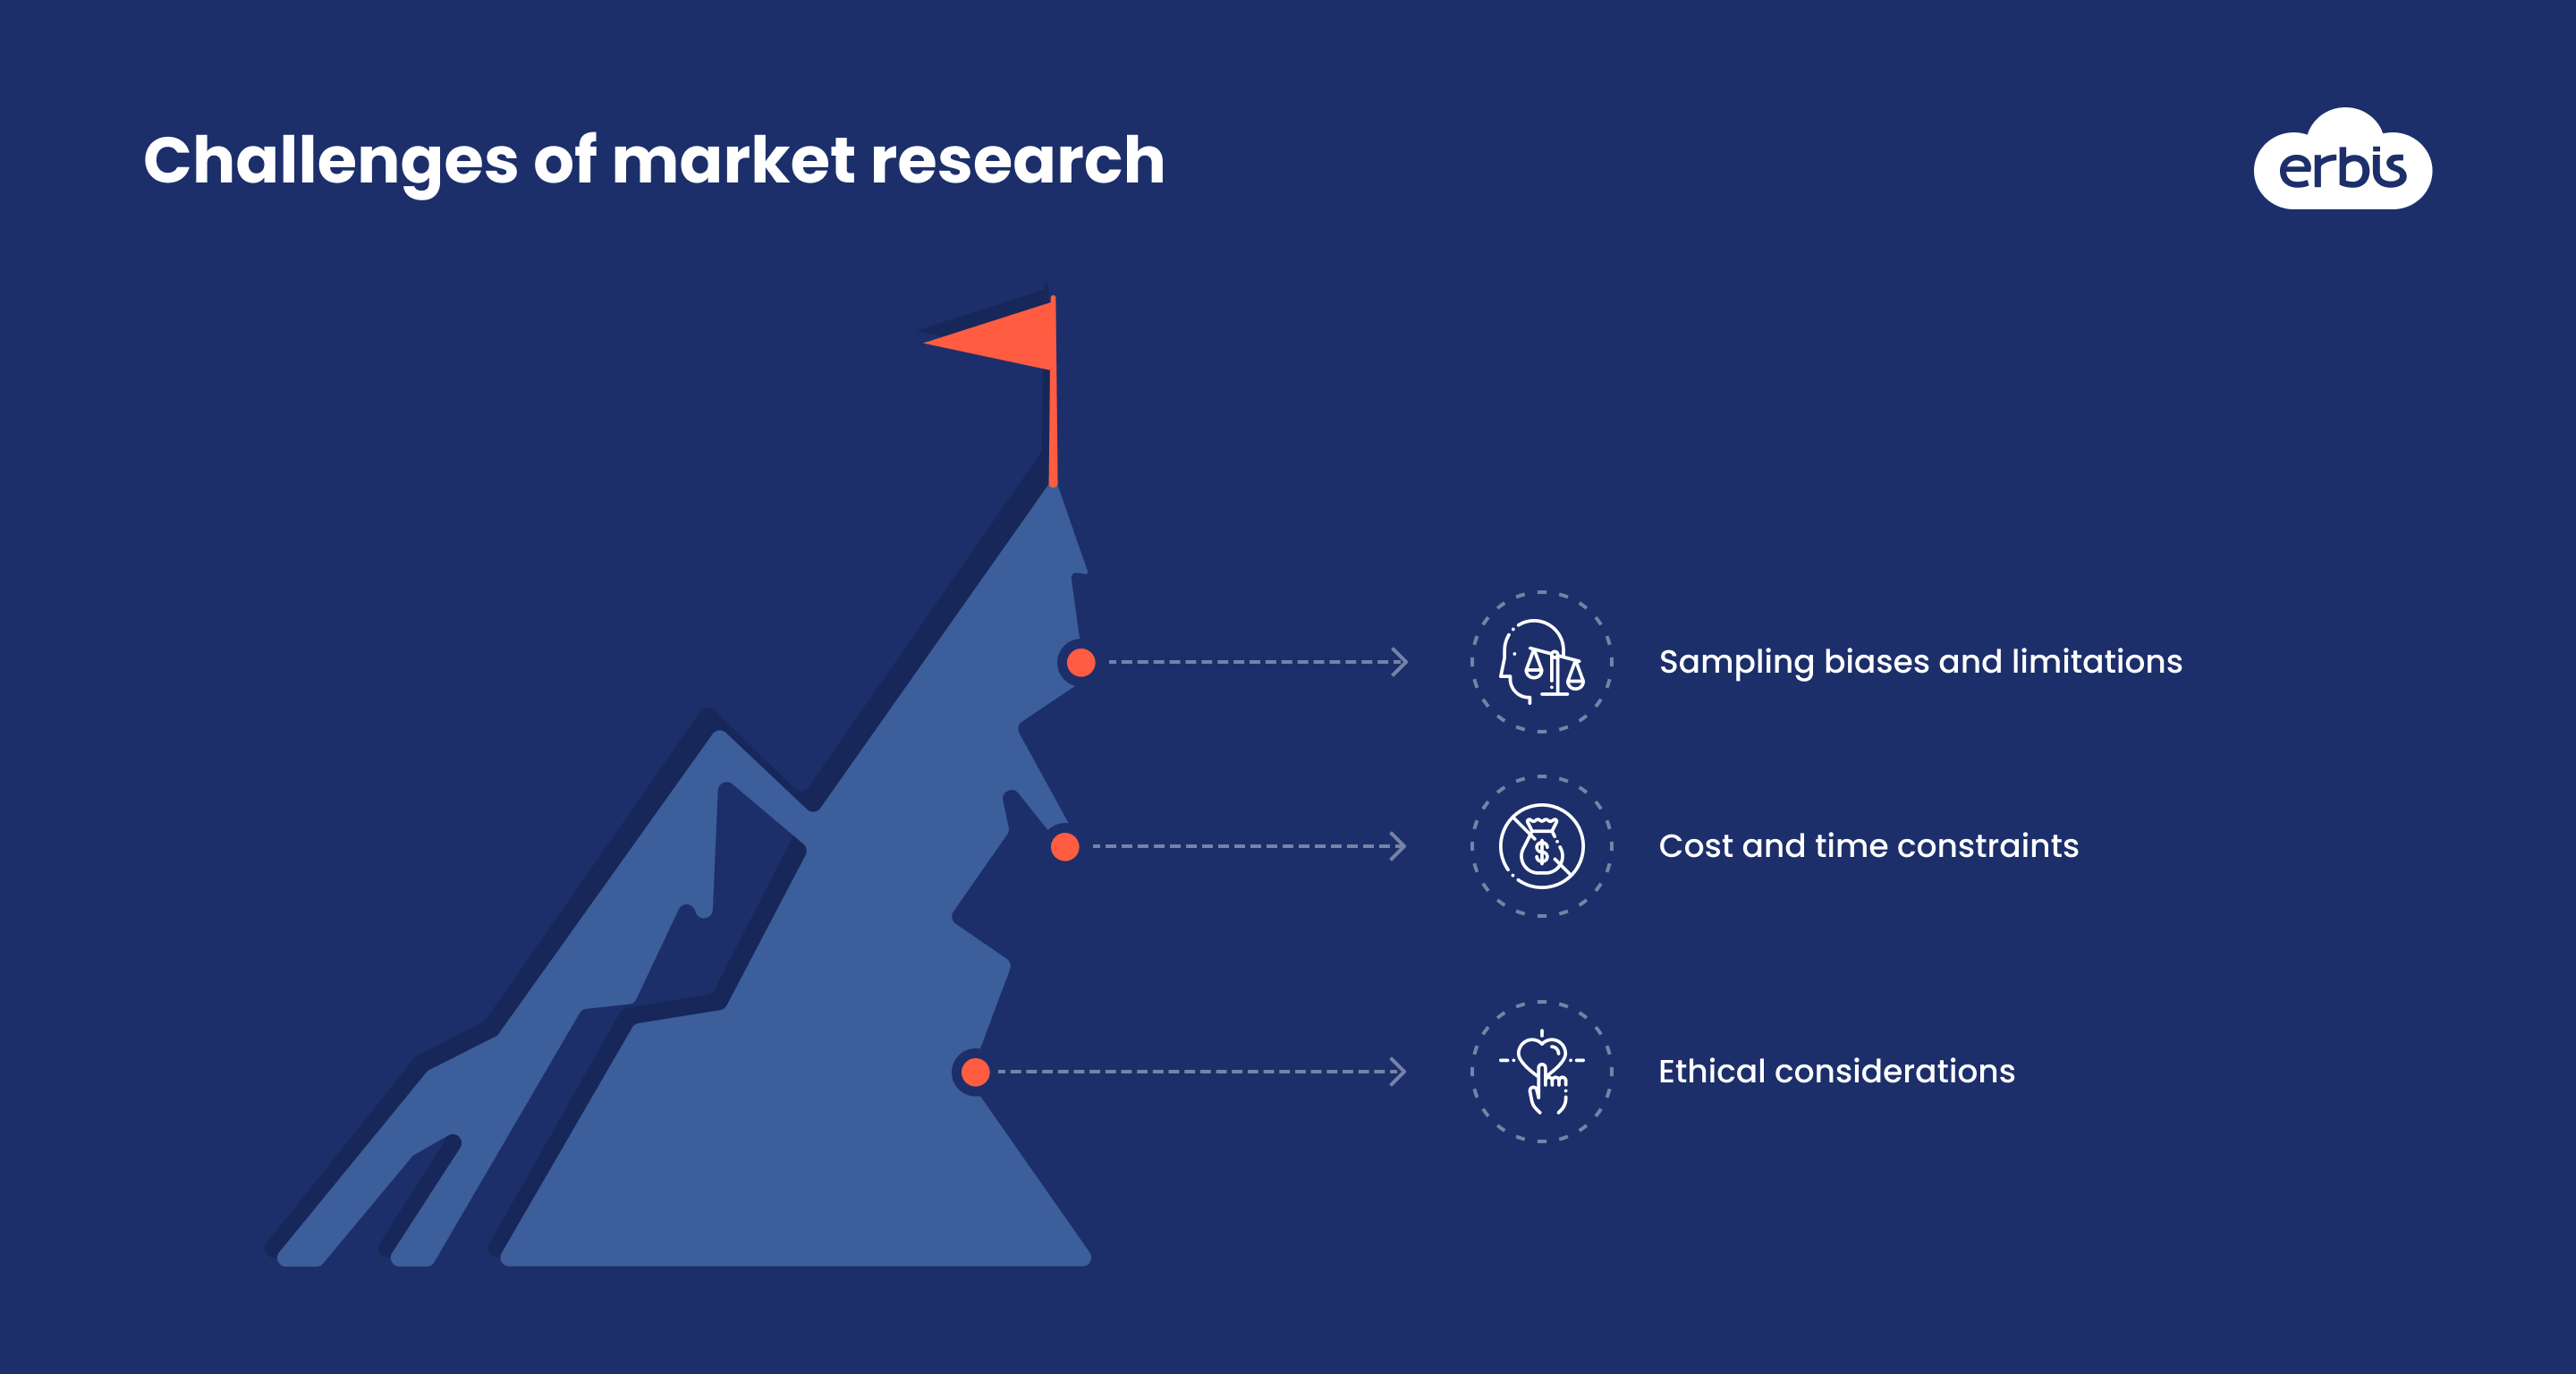 Challenges to face during market research